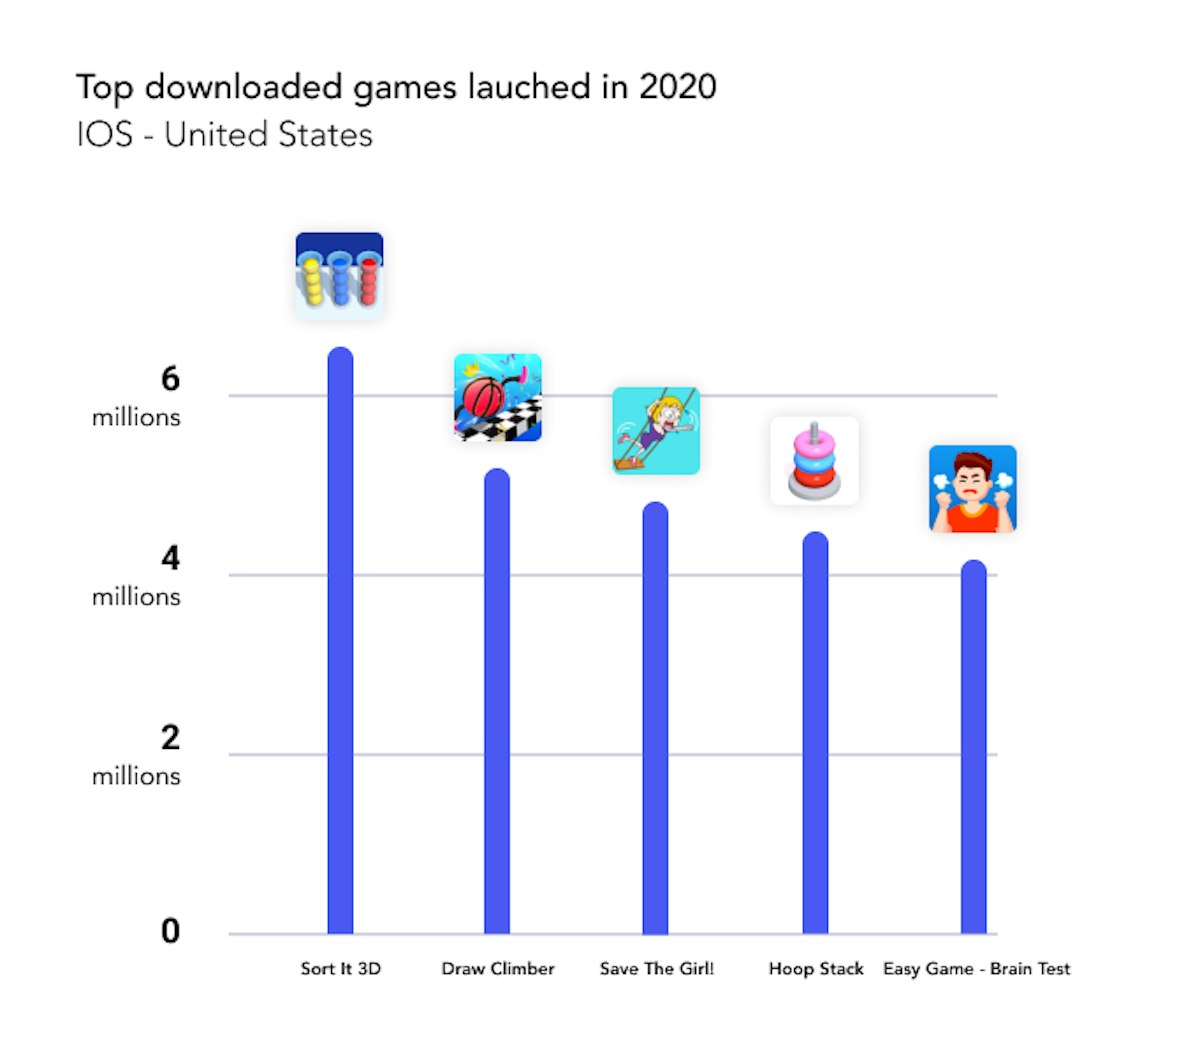 Top downloaded games launched in 2020